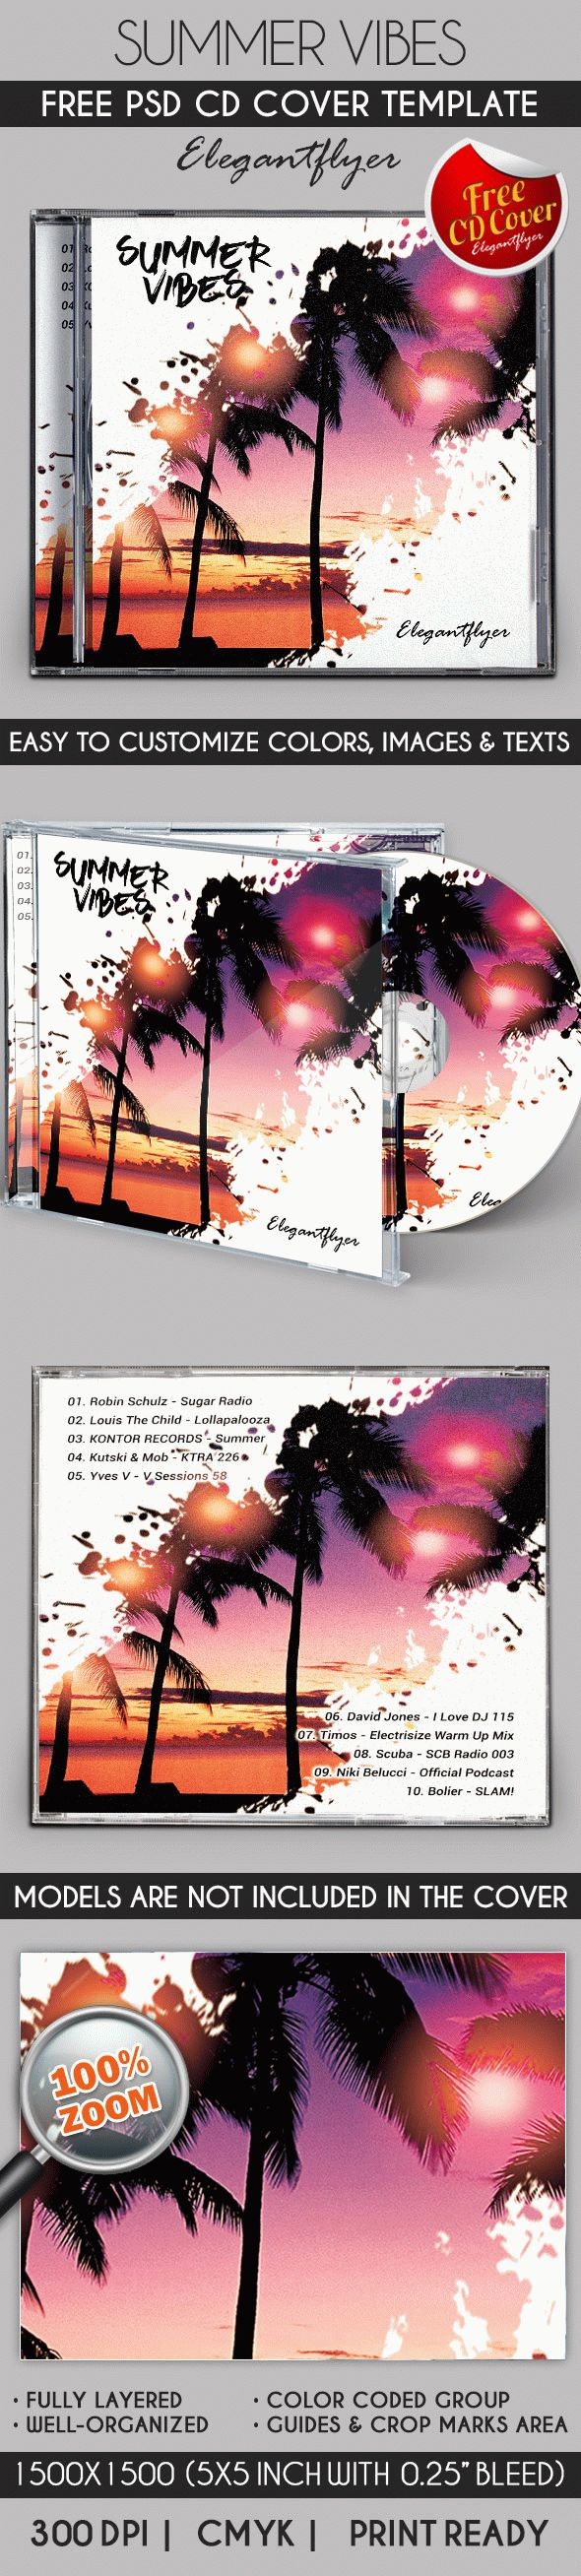 Free Summer Vibes For CD Cover Template by ElegantFlyer